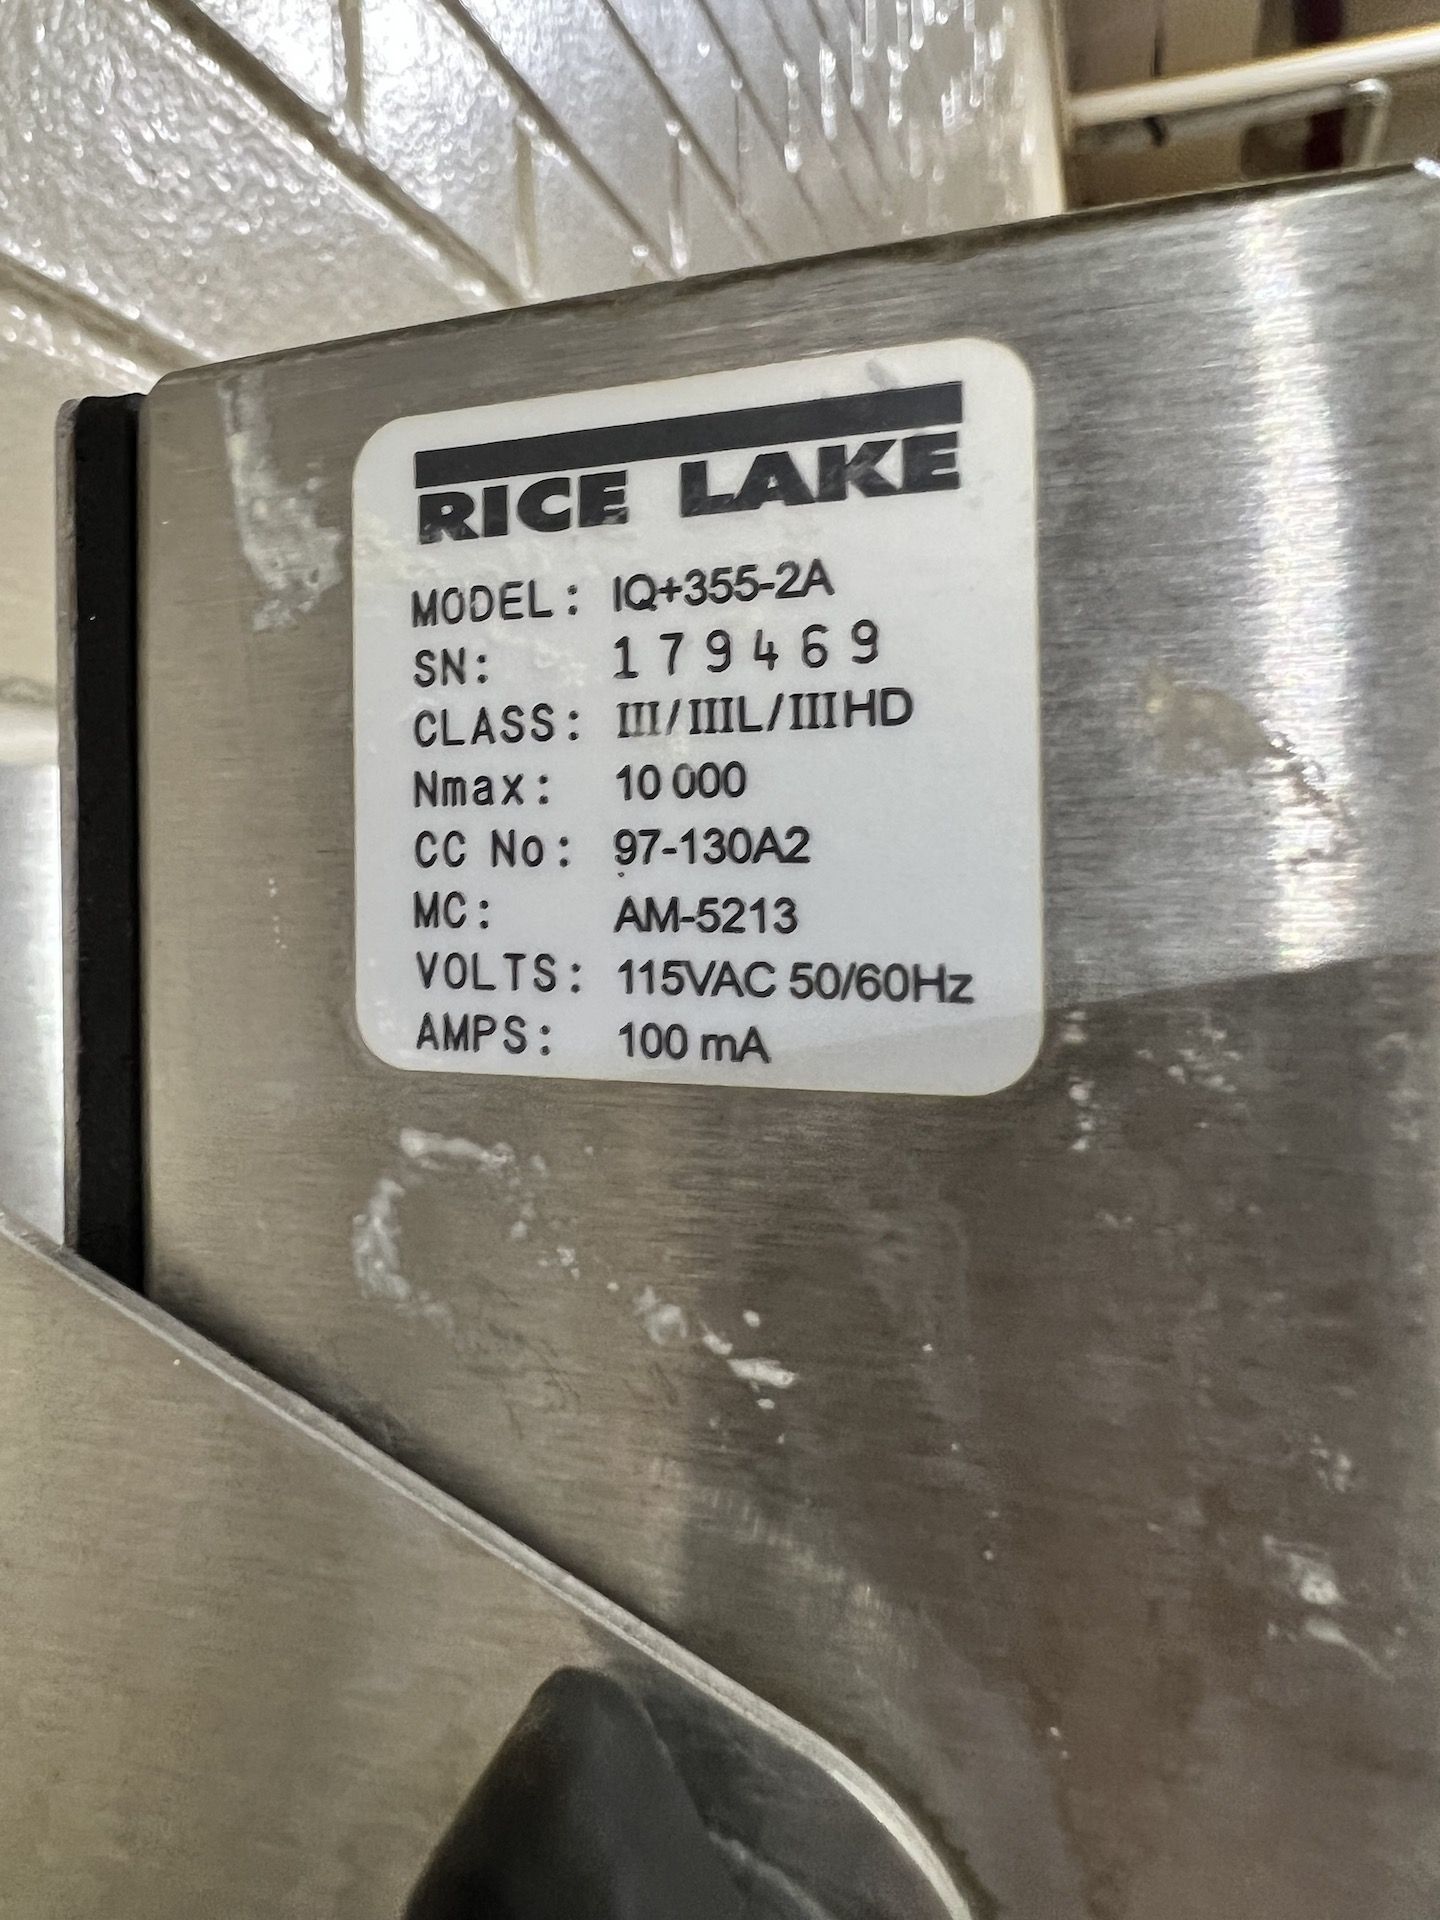 RICE LAKE S/S FLOOR SCALE WITH DIGITAL READOUT (SIMPLE LOADING FEE $165) - Image 5 of 6